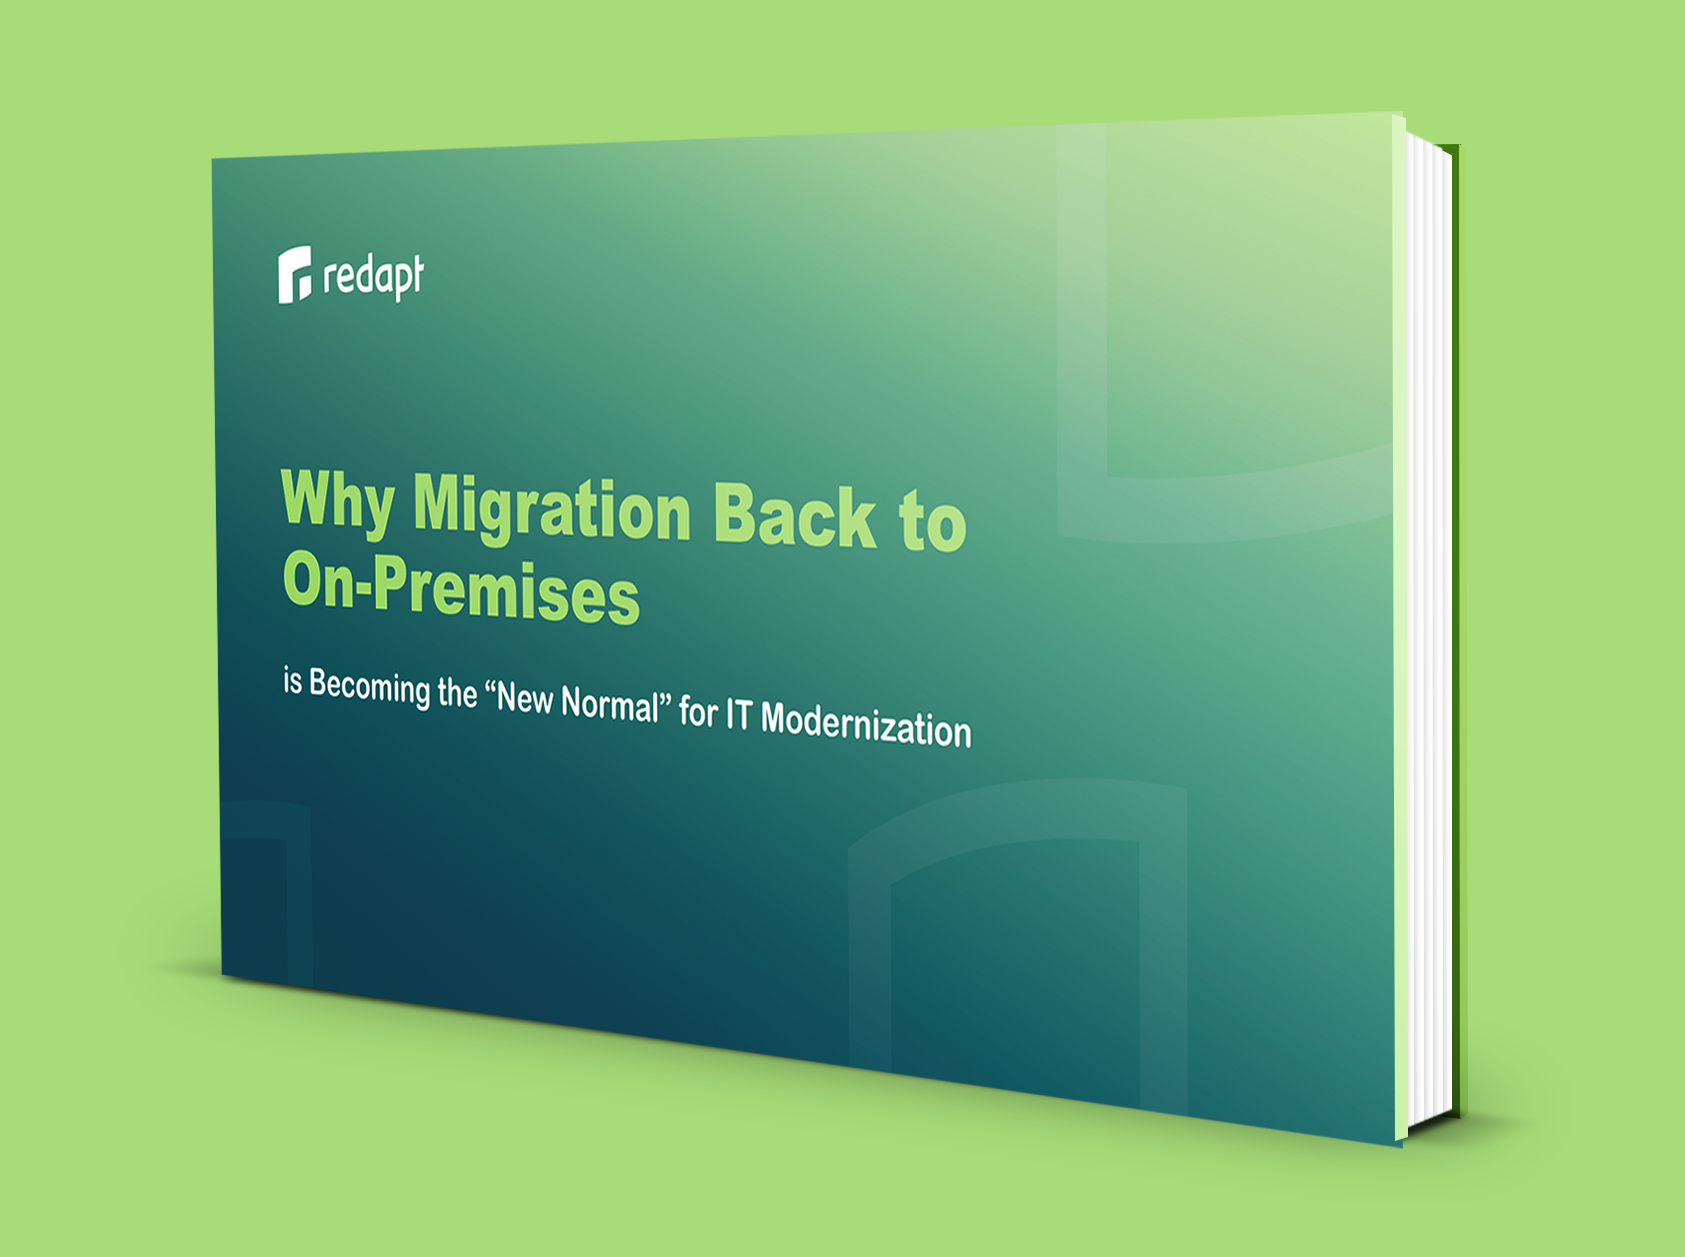 Why Migration Back to On-Premises is Becoming the 